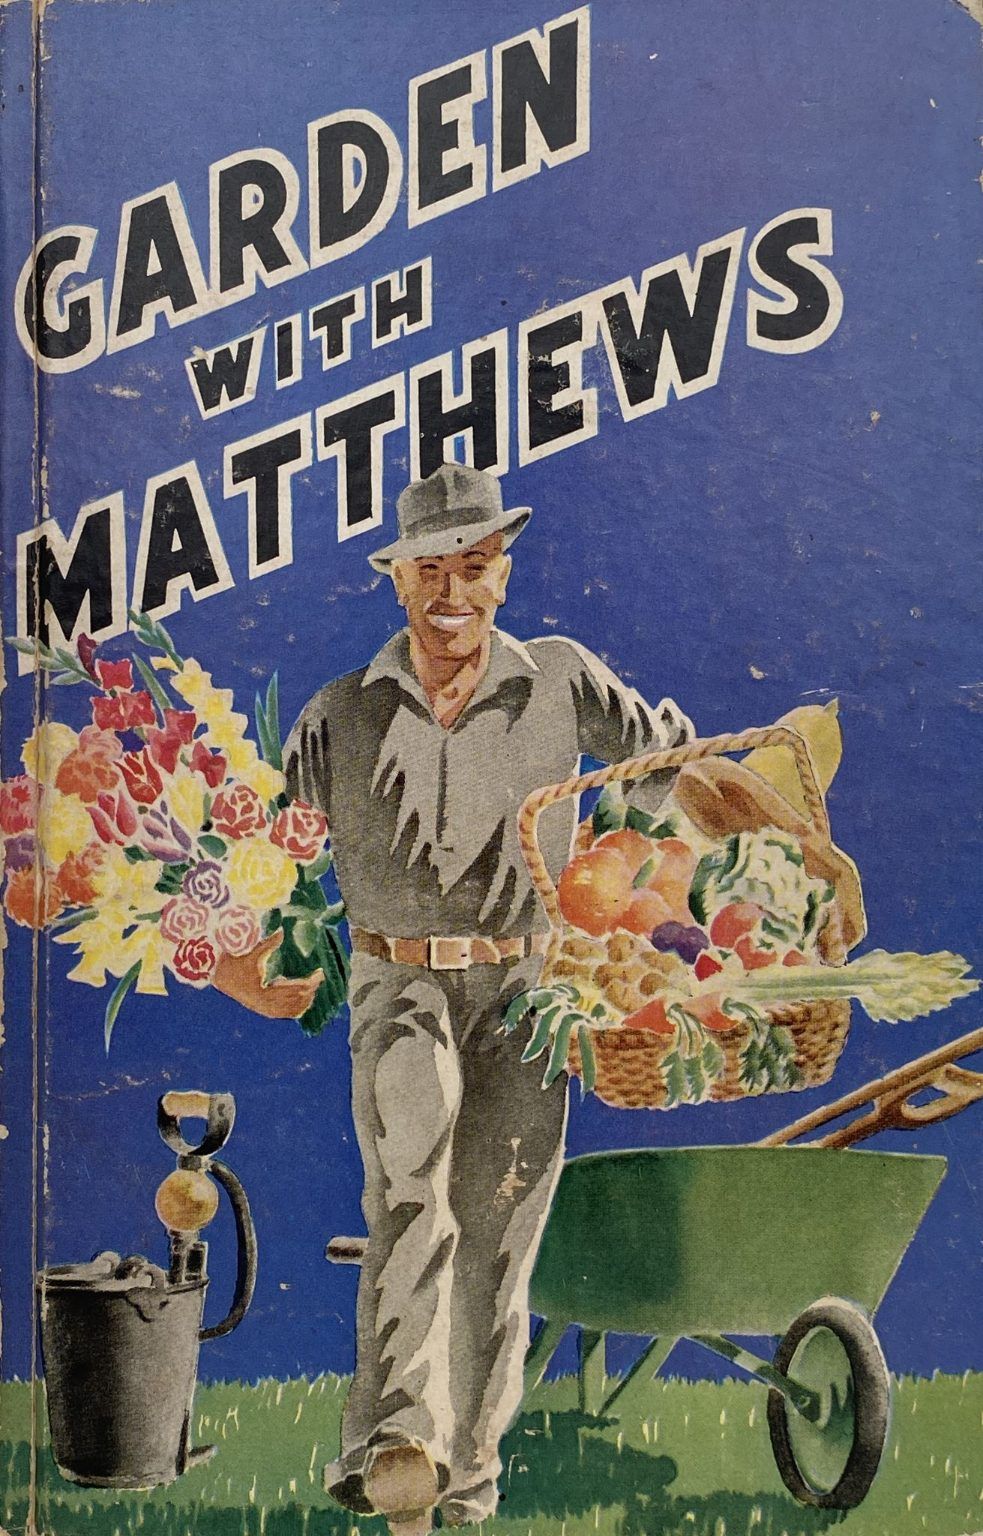 GARDEN WITH MATTHEWS: Highlights on the Art of Growing Fruit, Flowers and Veges